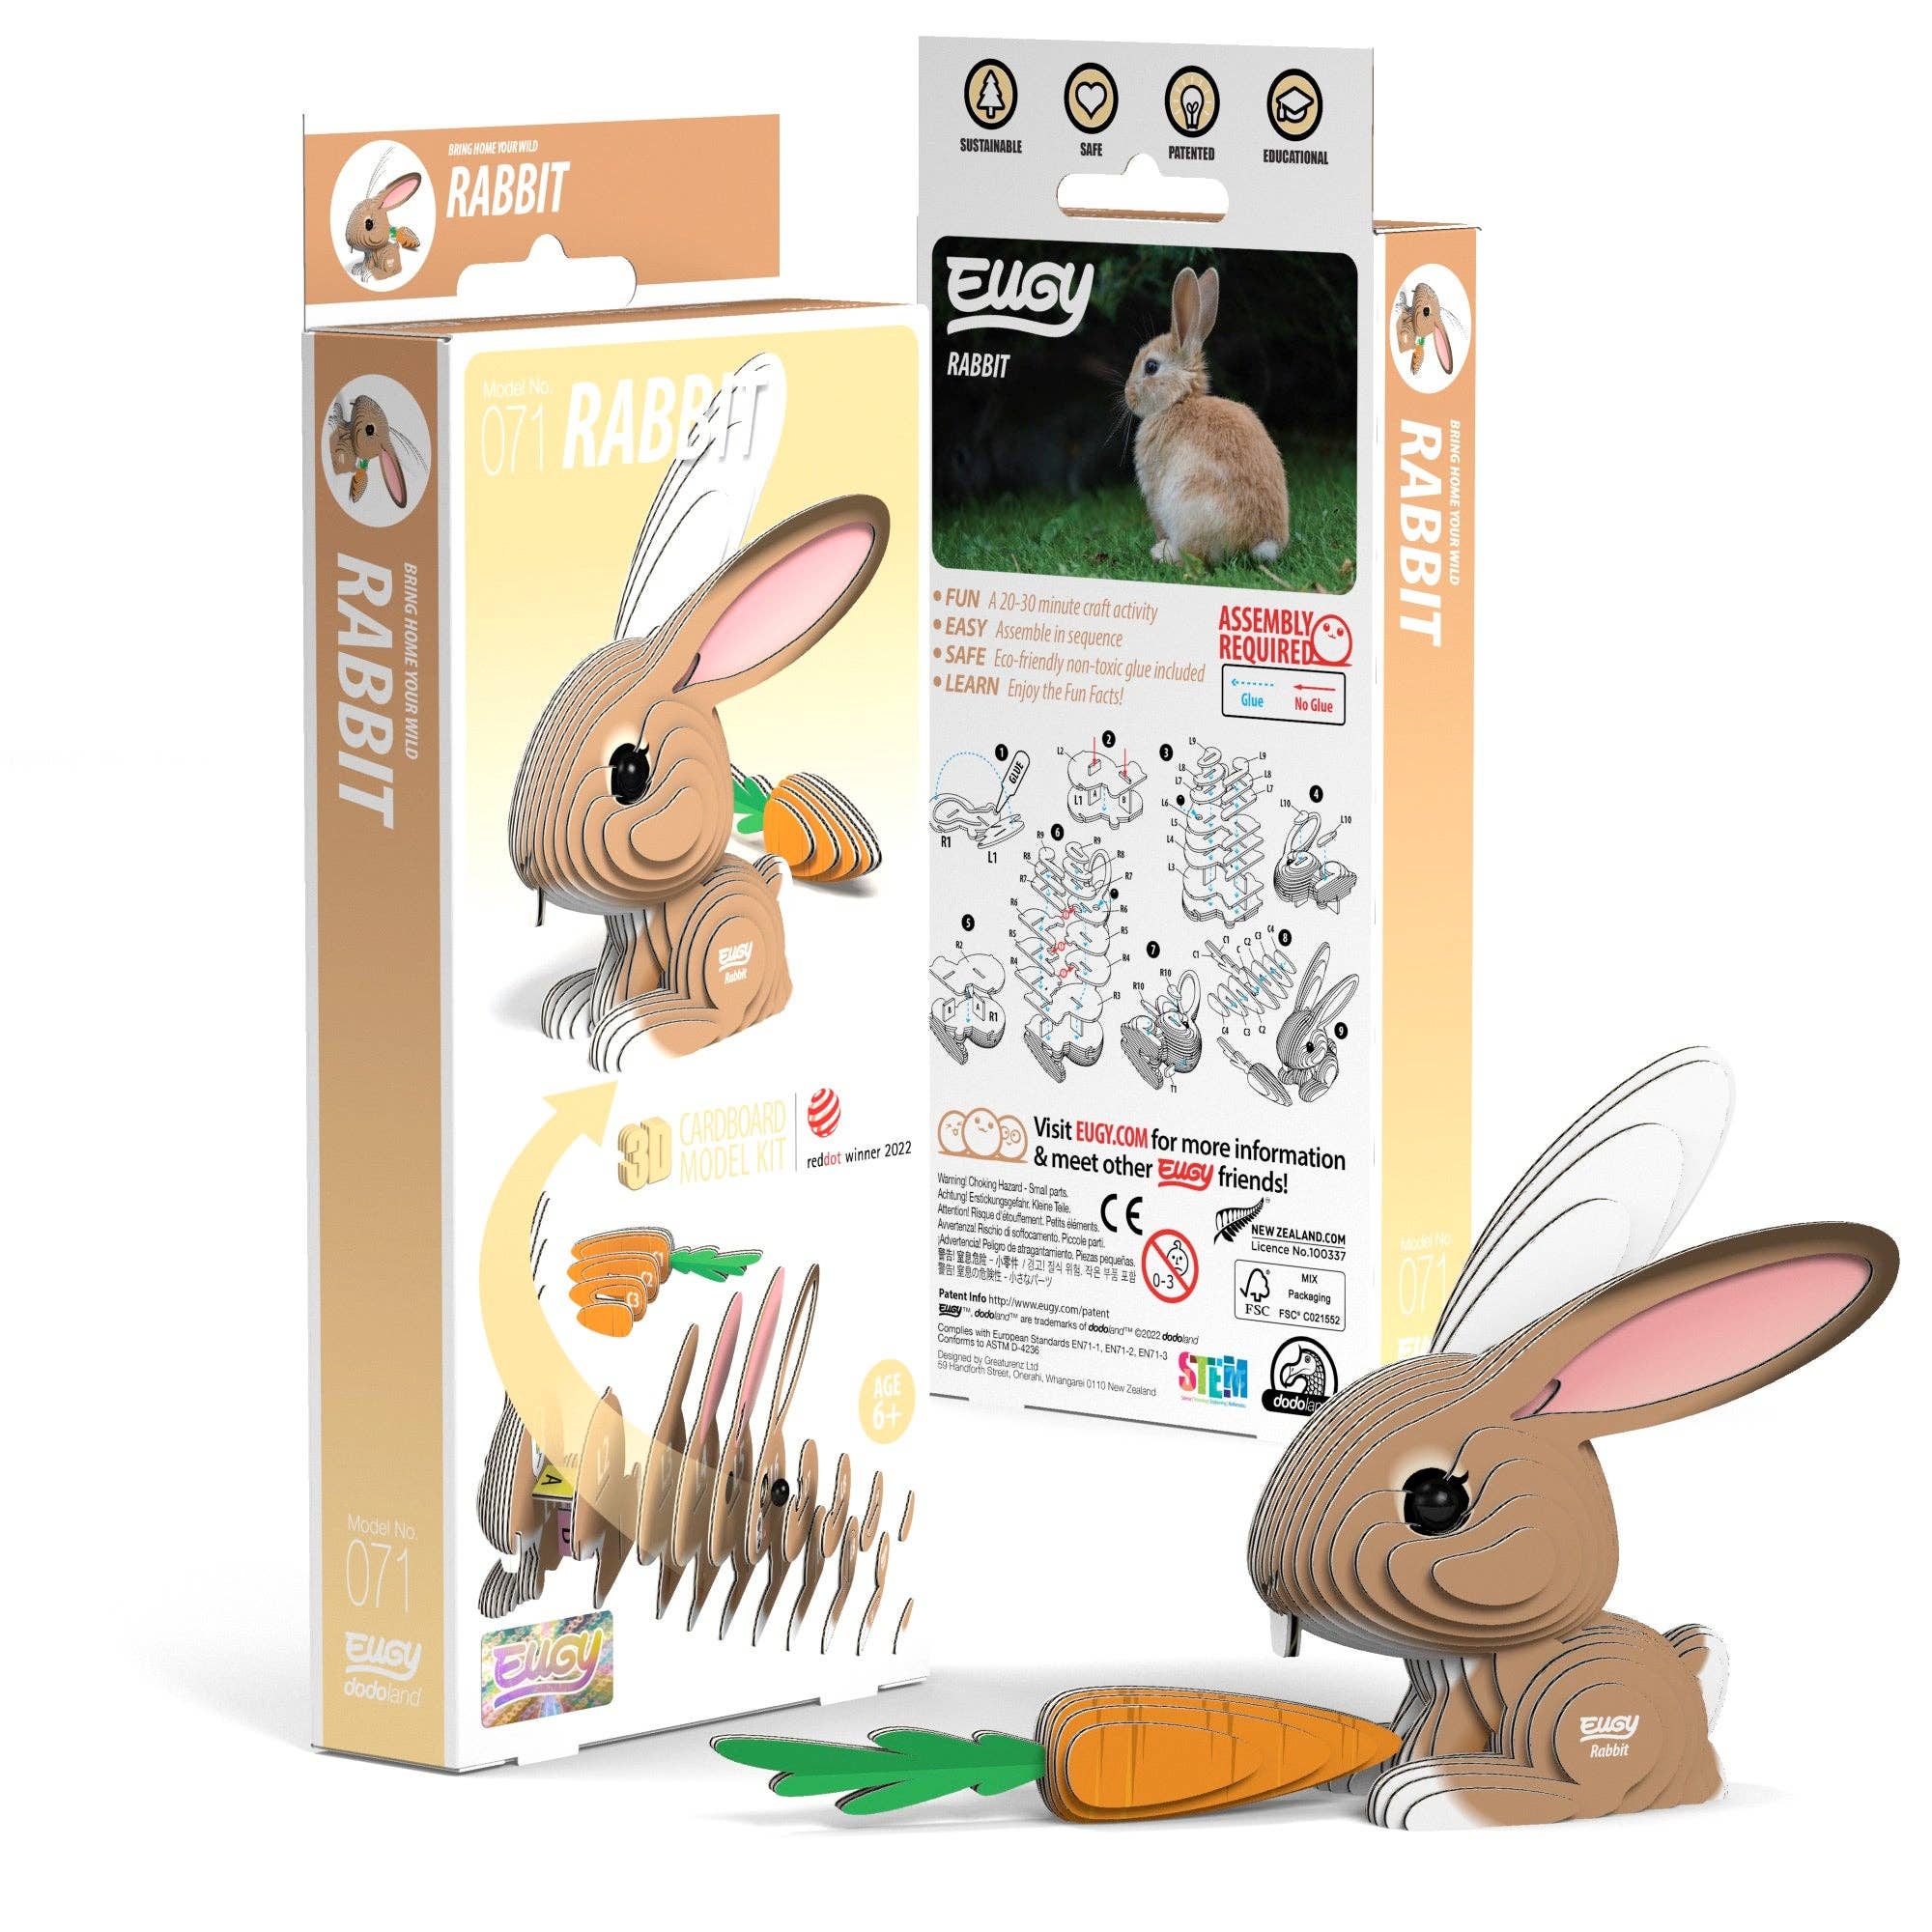 Two packages of the Rabbit puzzle next to eachother, one box is diplaying the front of the packaging. The other box is displaying the back of the packaging. A finished model is sitting infront of the two boxes.